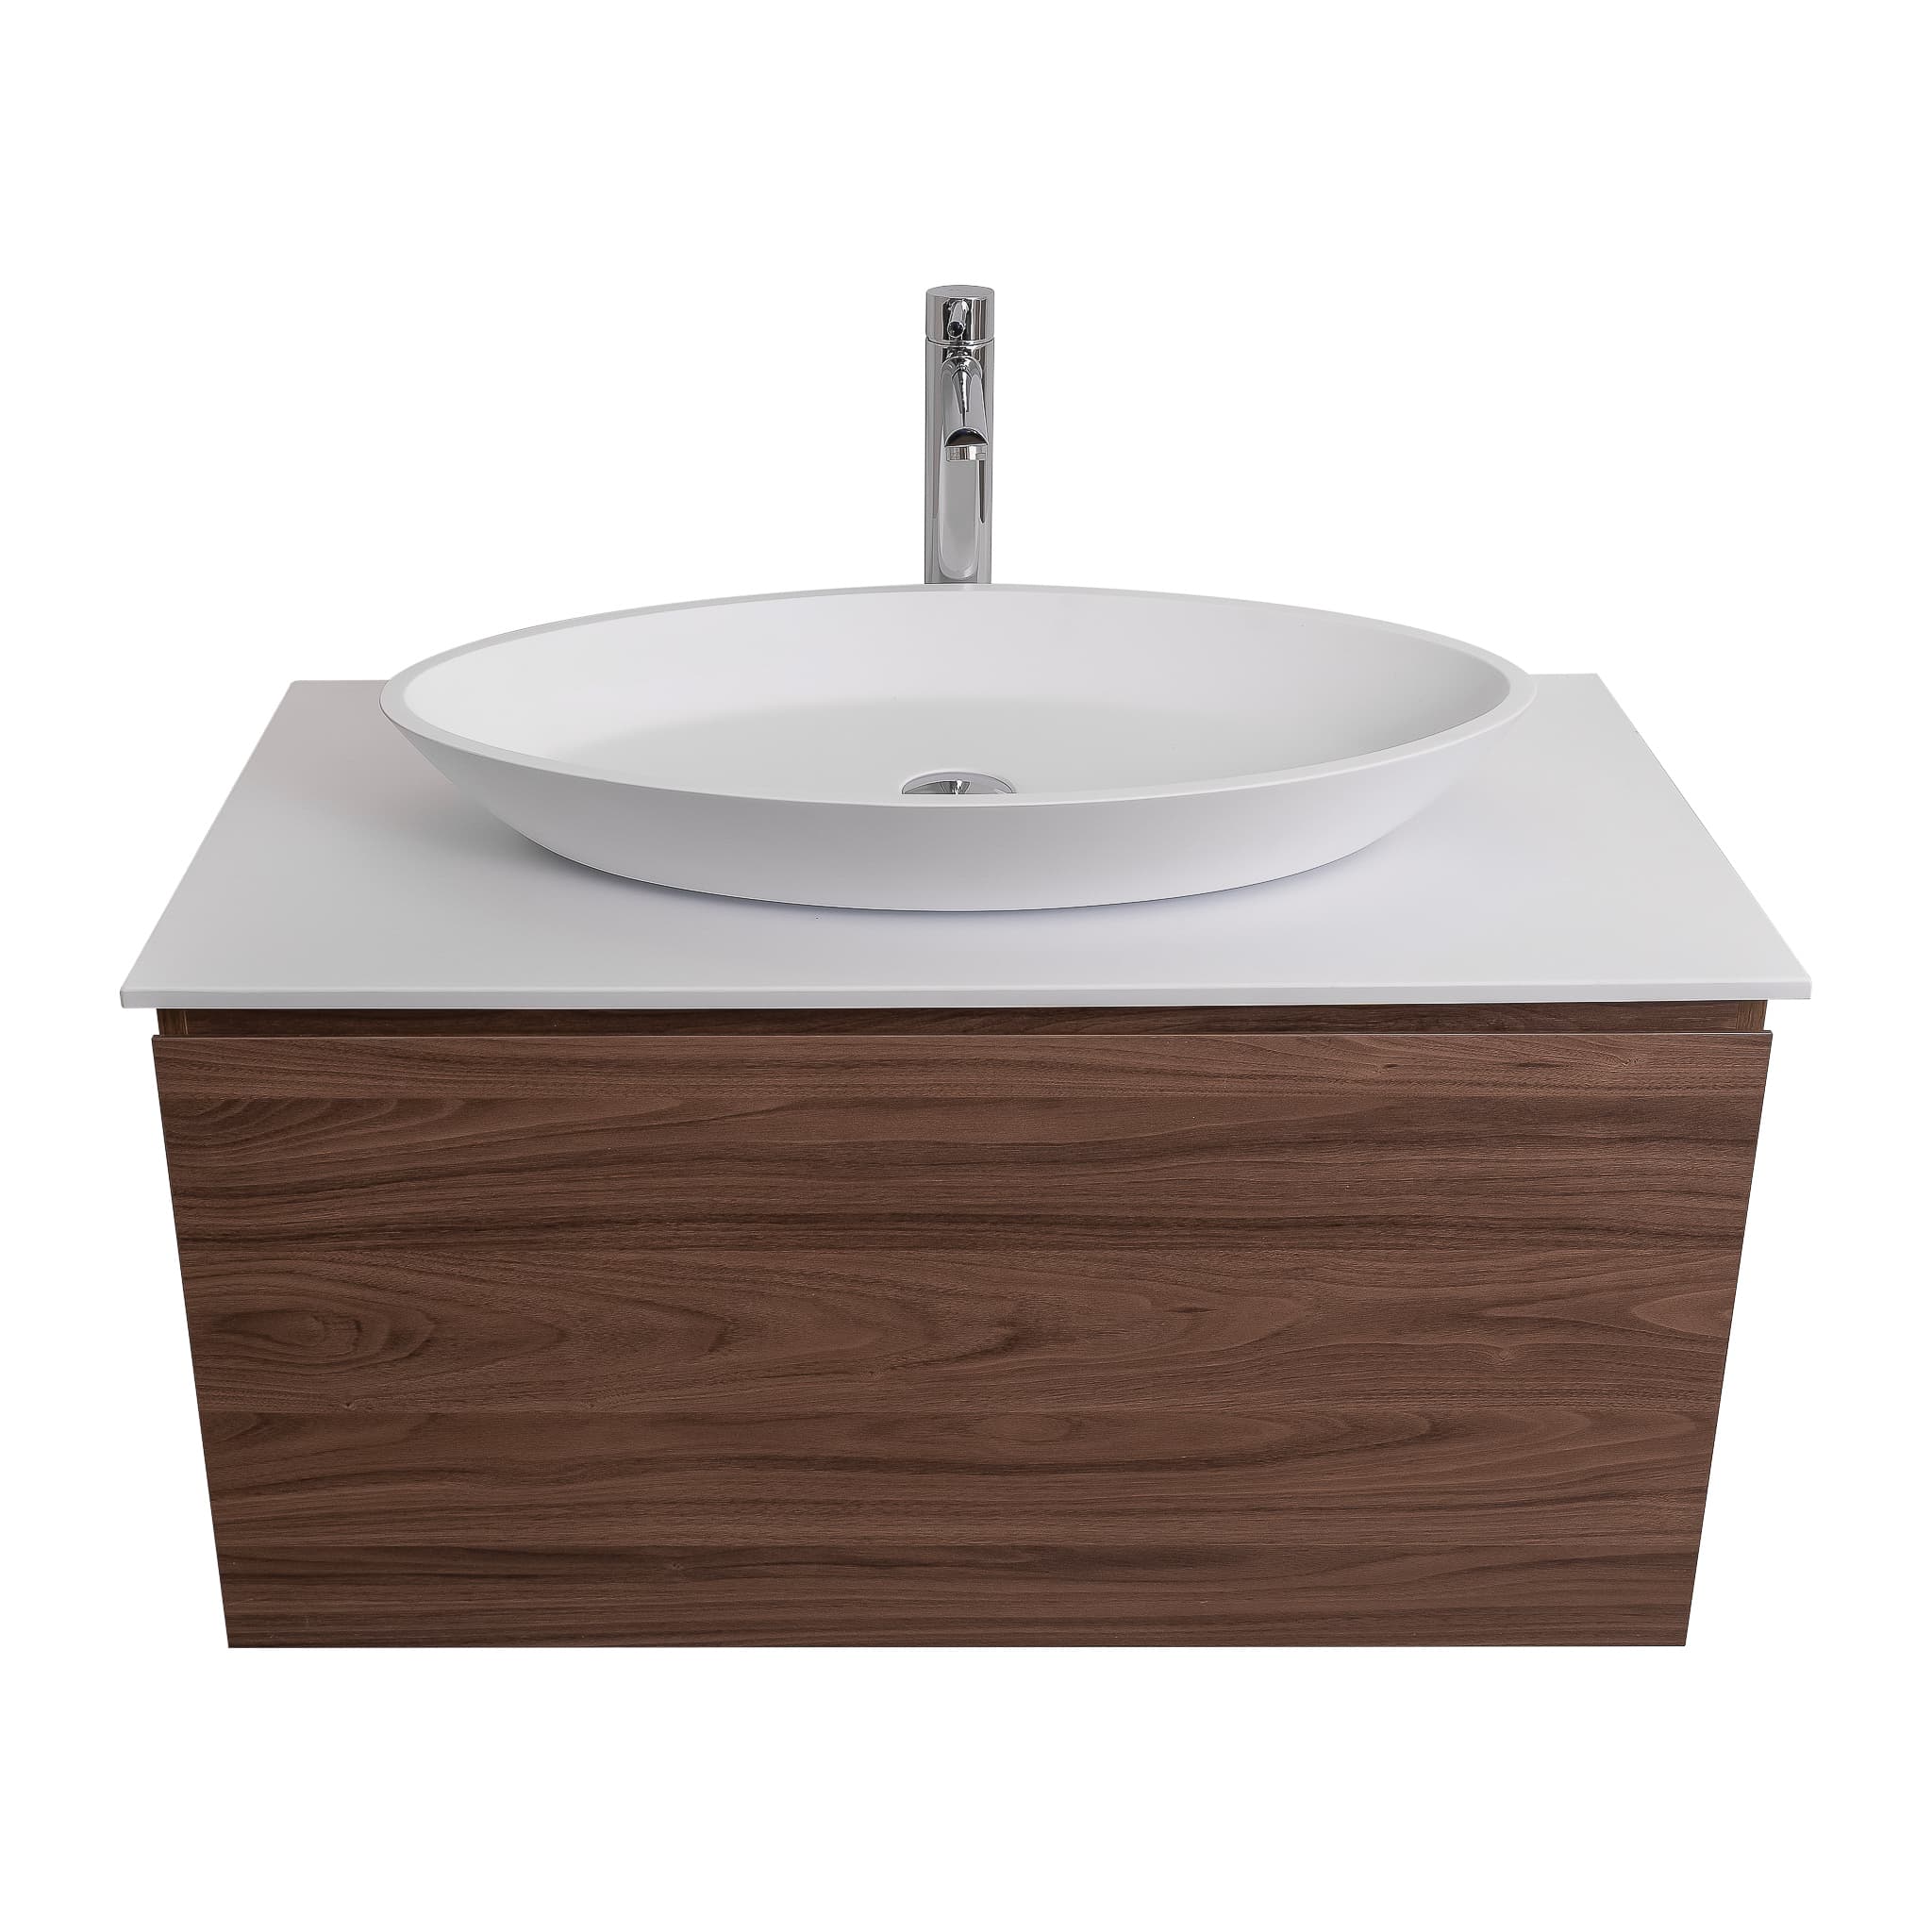 Venice 35.5 Walnut Wood Texture Cabinet, Solid Surface Flat White Counter And Oval Solid Surface White Basin 1305, Wall Mounted Modern Vanity Set